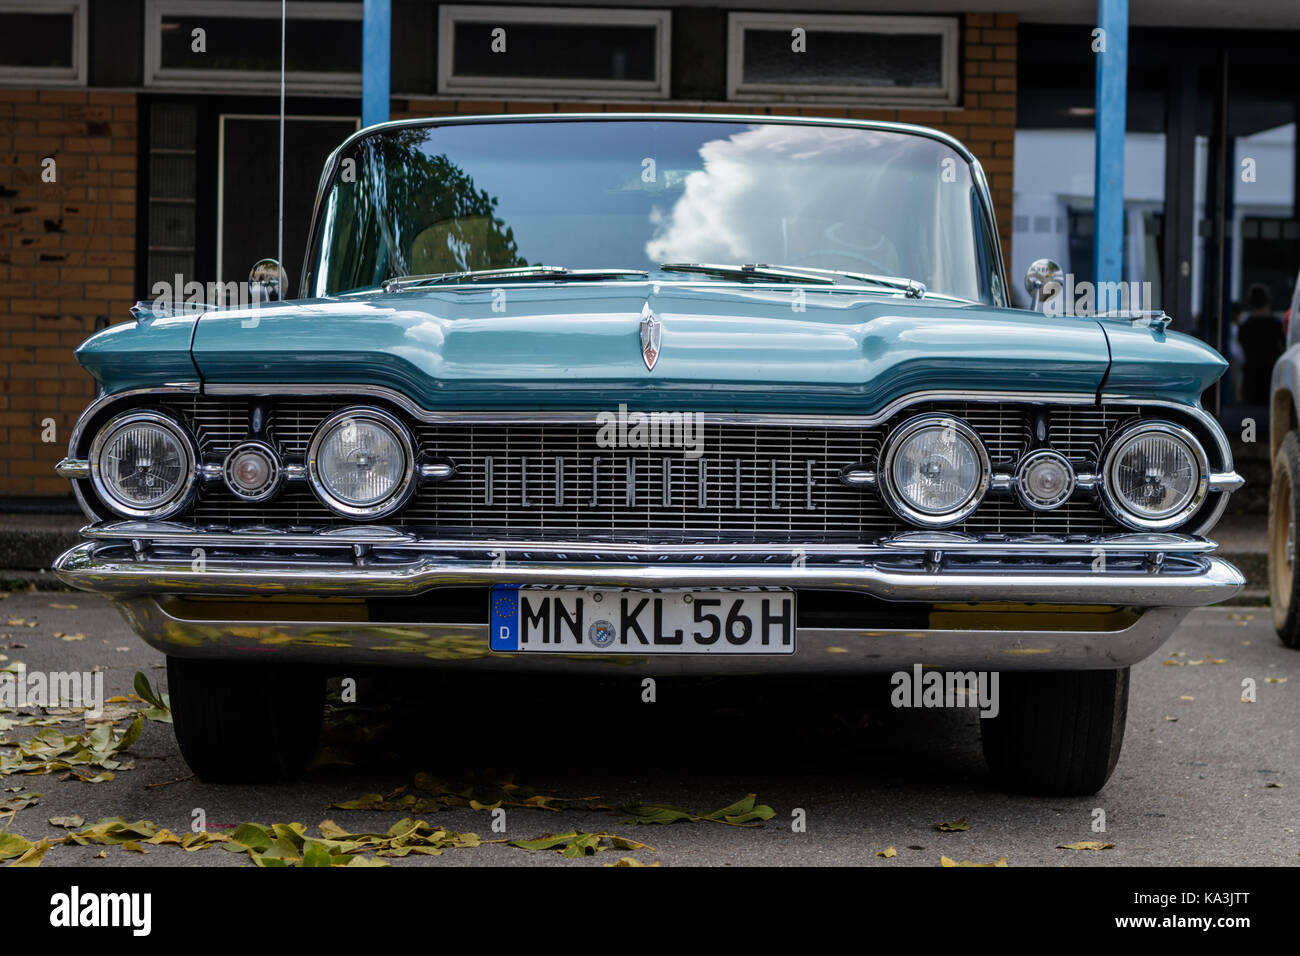 Laupheim, Germany - September 24, 2017: Oldsmobile 98 oldtimer car at the US Car Meeting event on September 24, 2017 in Laupheim, Germany. Stock Photo